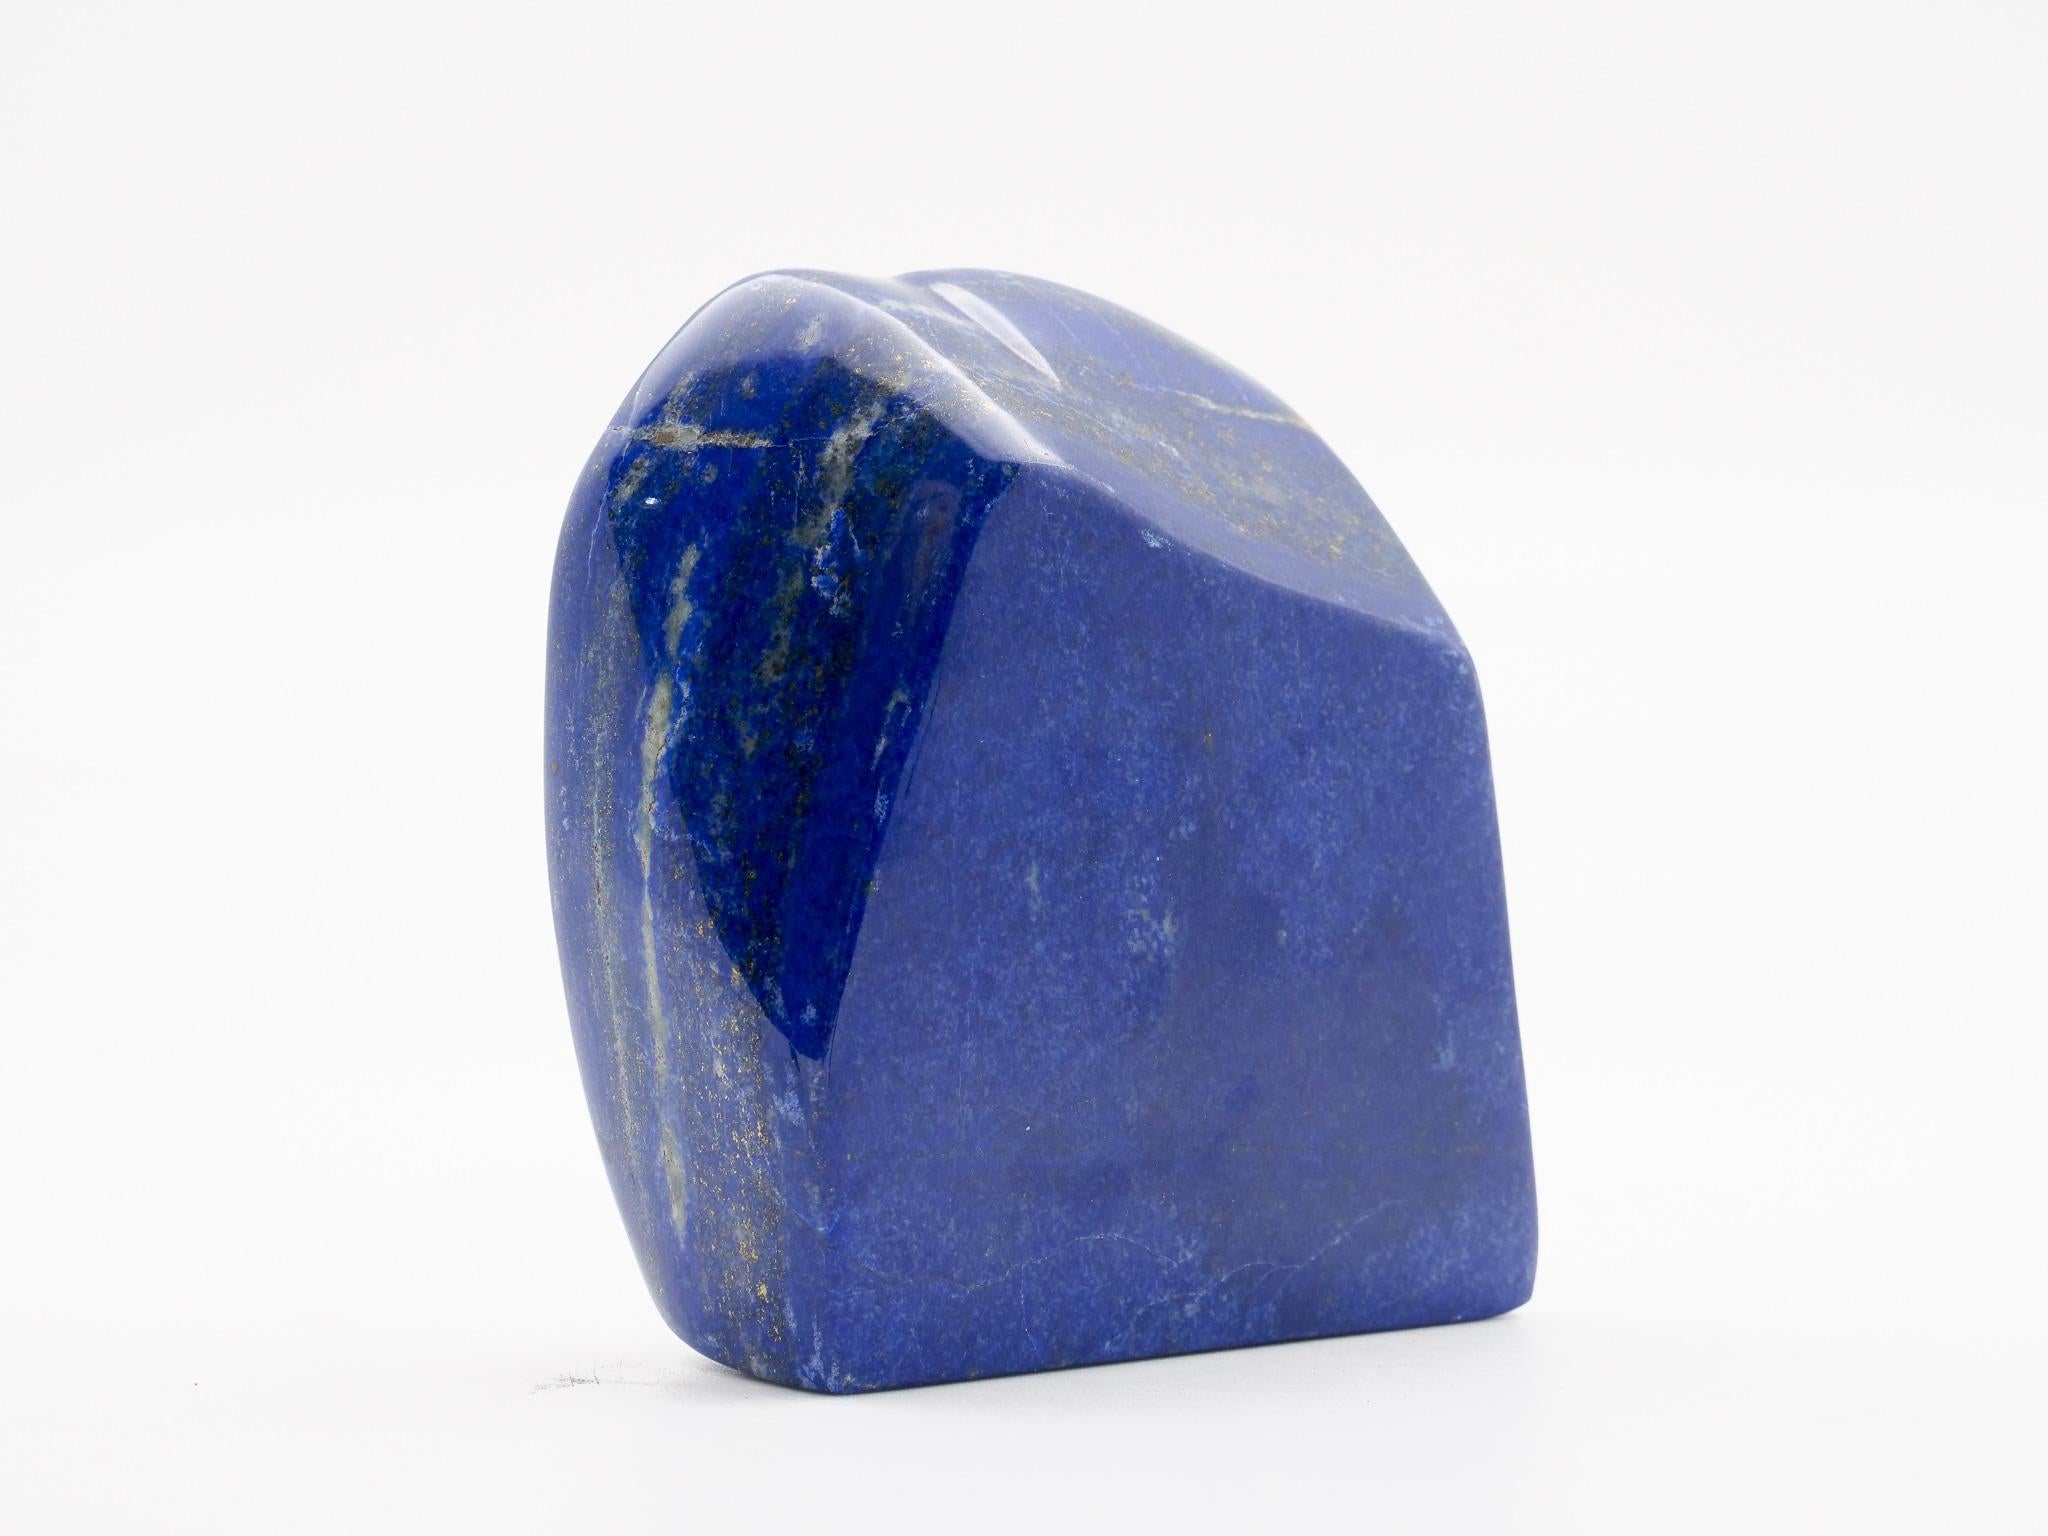 Beautifully polished lapis lazuli mineral specimen from Afghanistan. This semi-precious stone has been prized since antiquity due to its intense, beautiful blue coloring and golden speckles (pyrite flecks). It was also used in the fine arts, in a